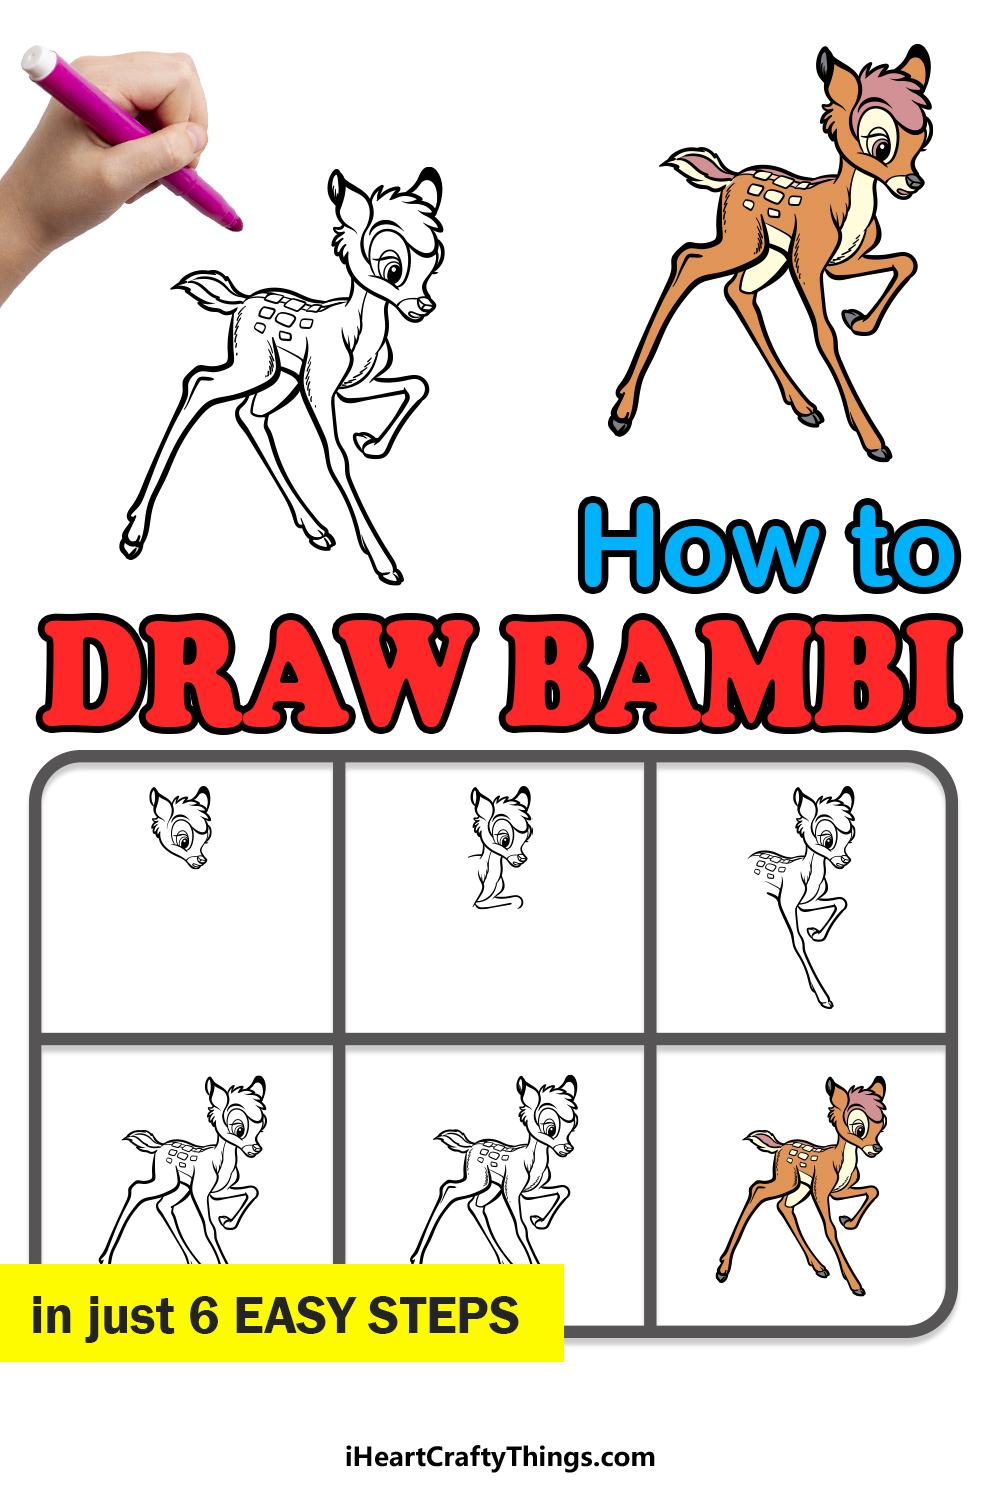 how to draw Bambi in 6 easy steps